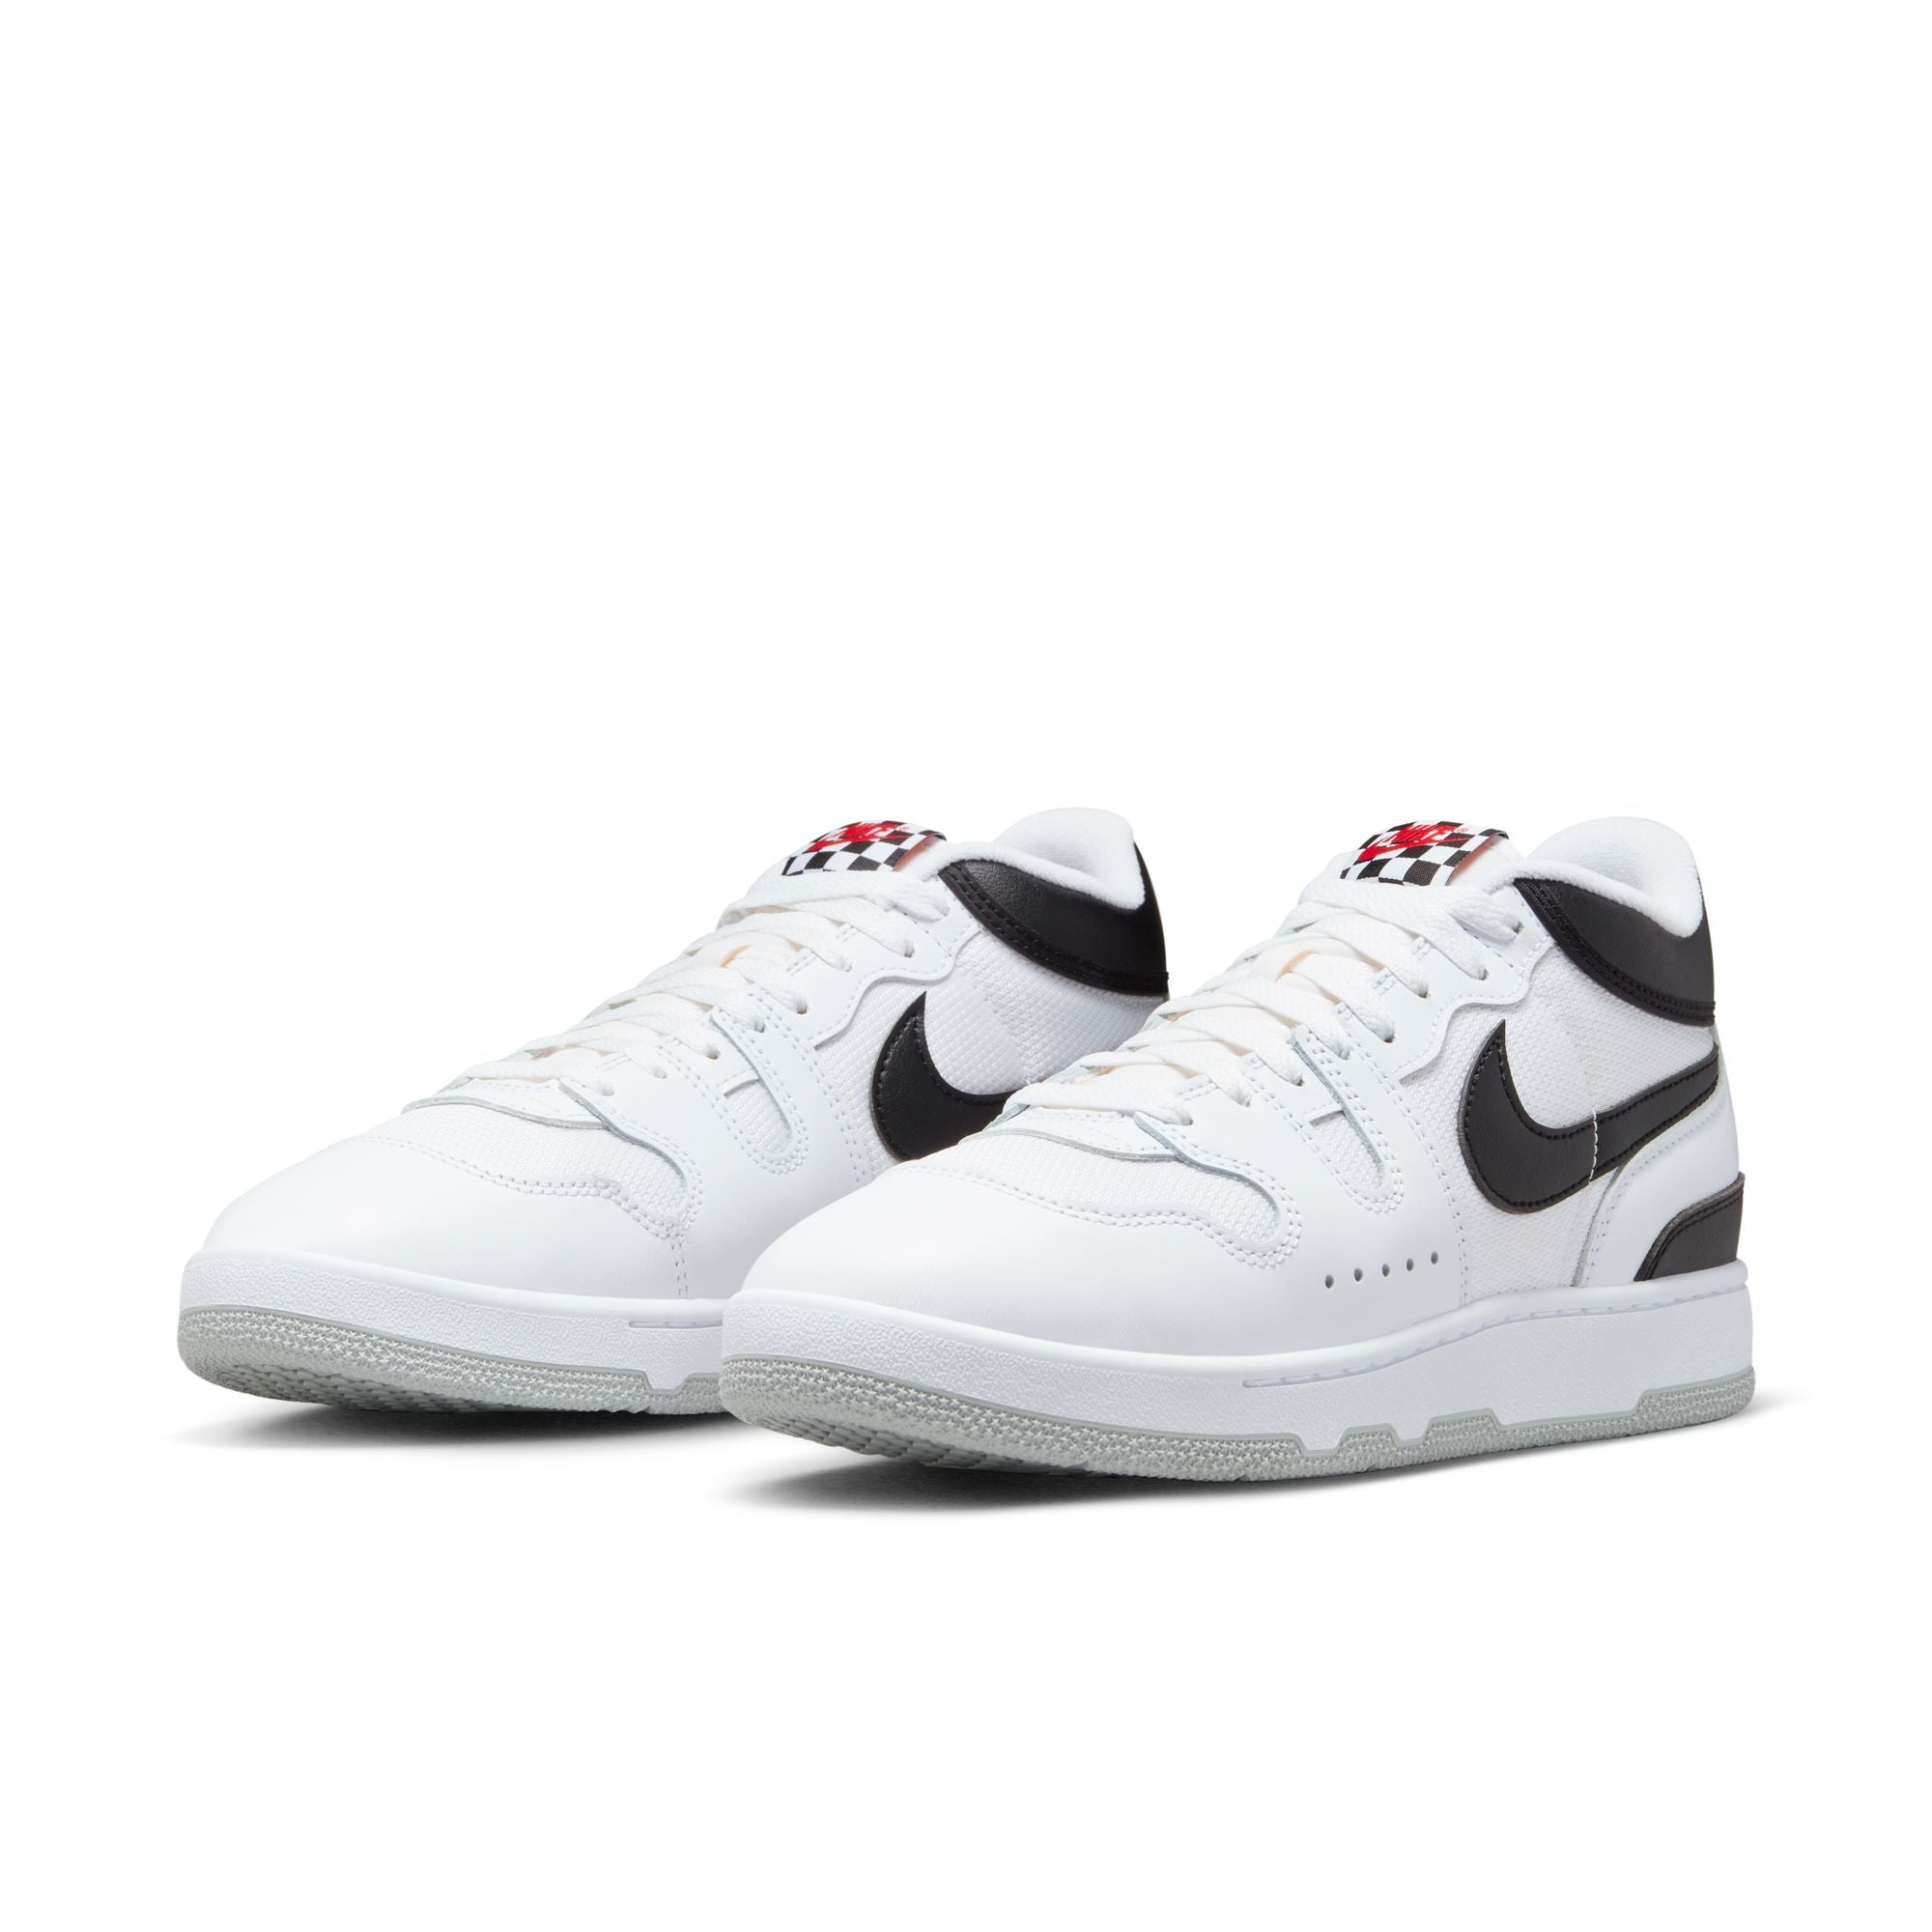 Nike Attack QS SP （ナイキ アタック QS SP ）